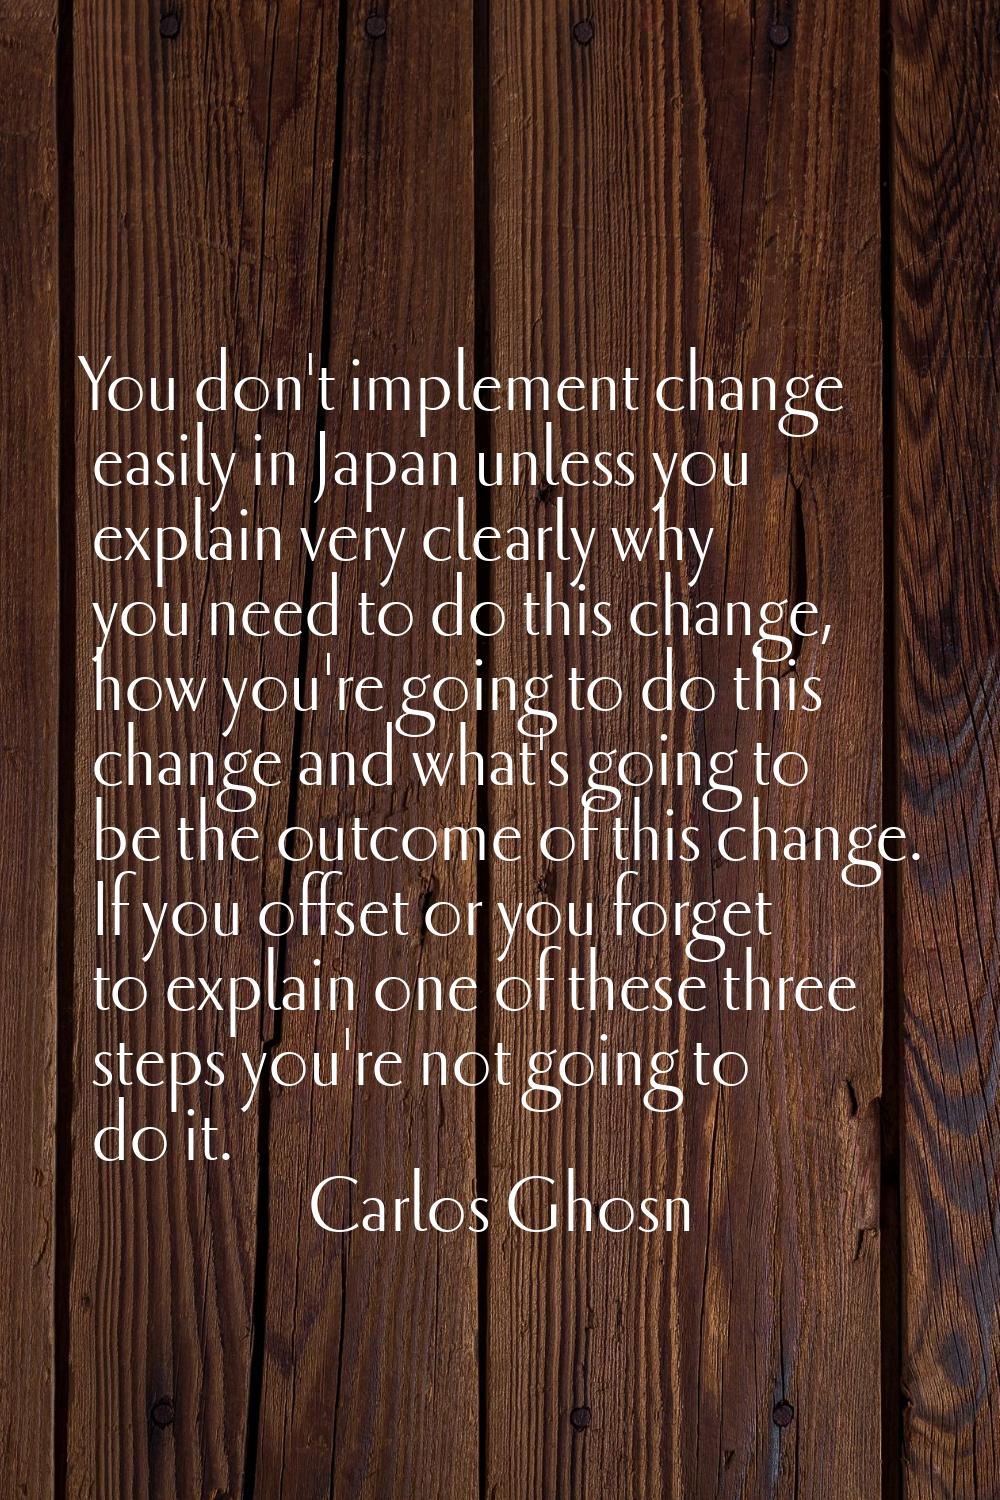 You don't implement change easily in Japan unless you explain very clearly why you need to do this 